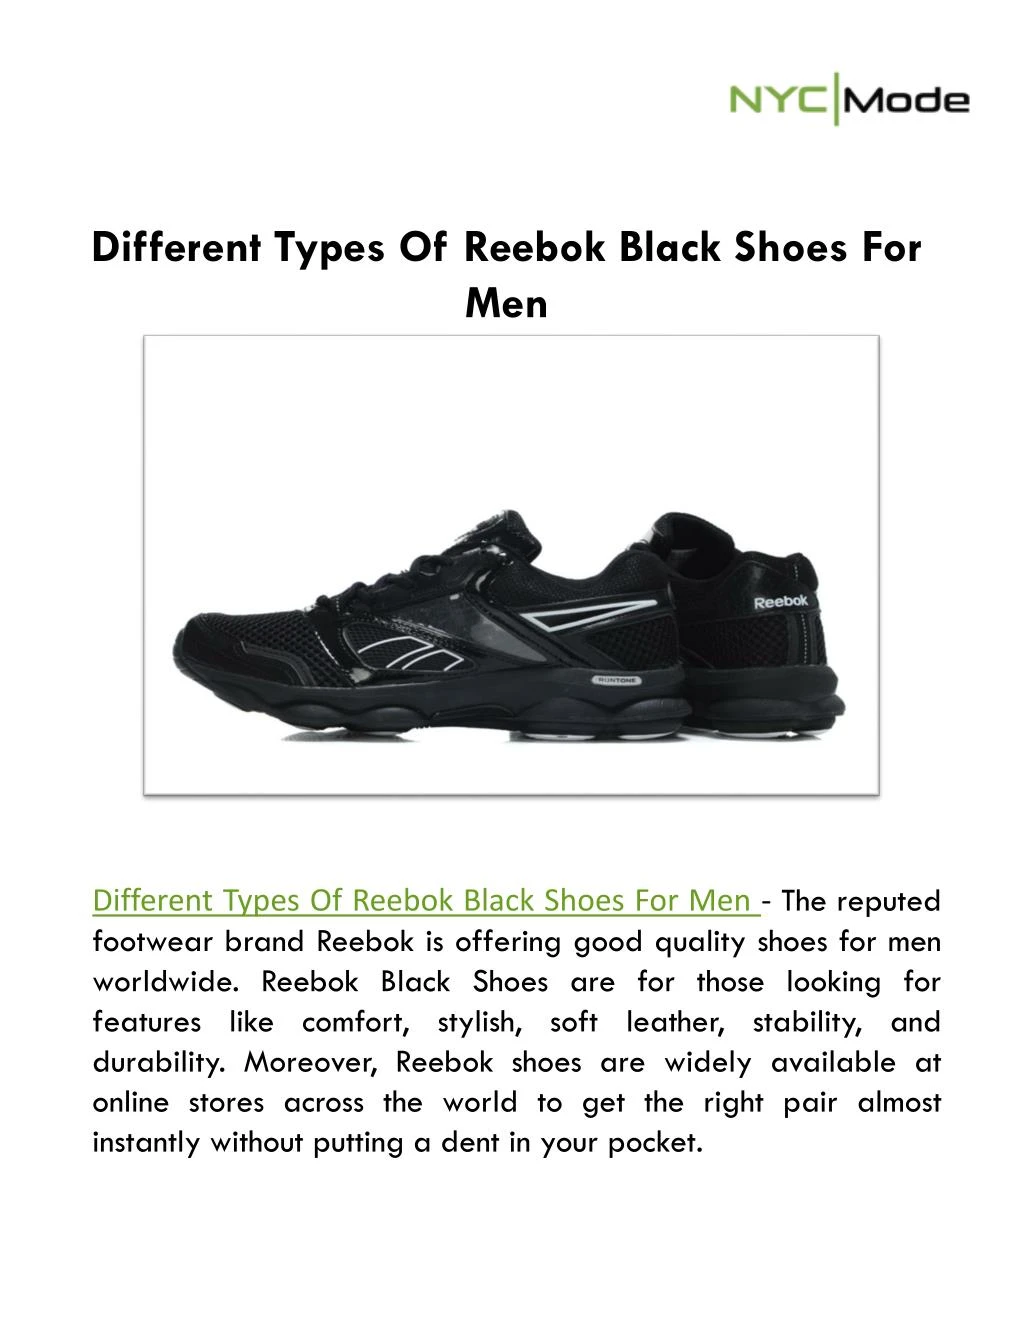 different types of reebok black shoes for men